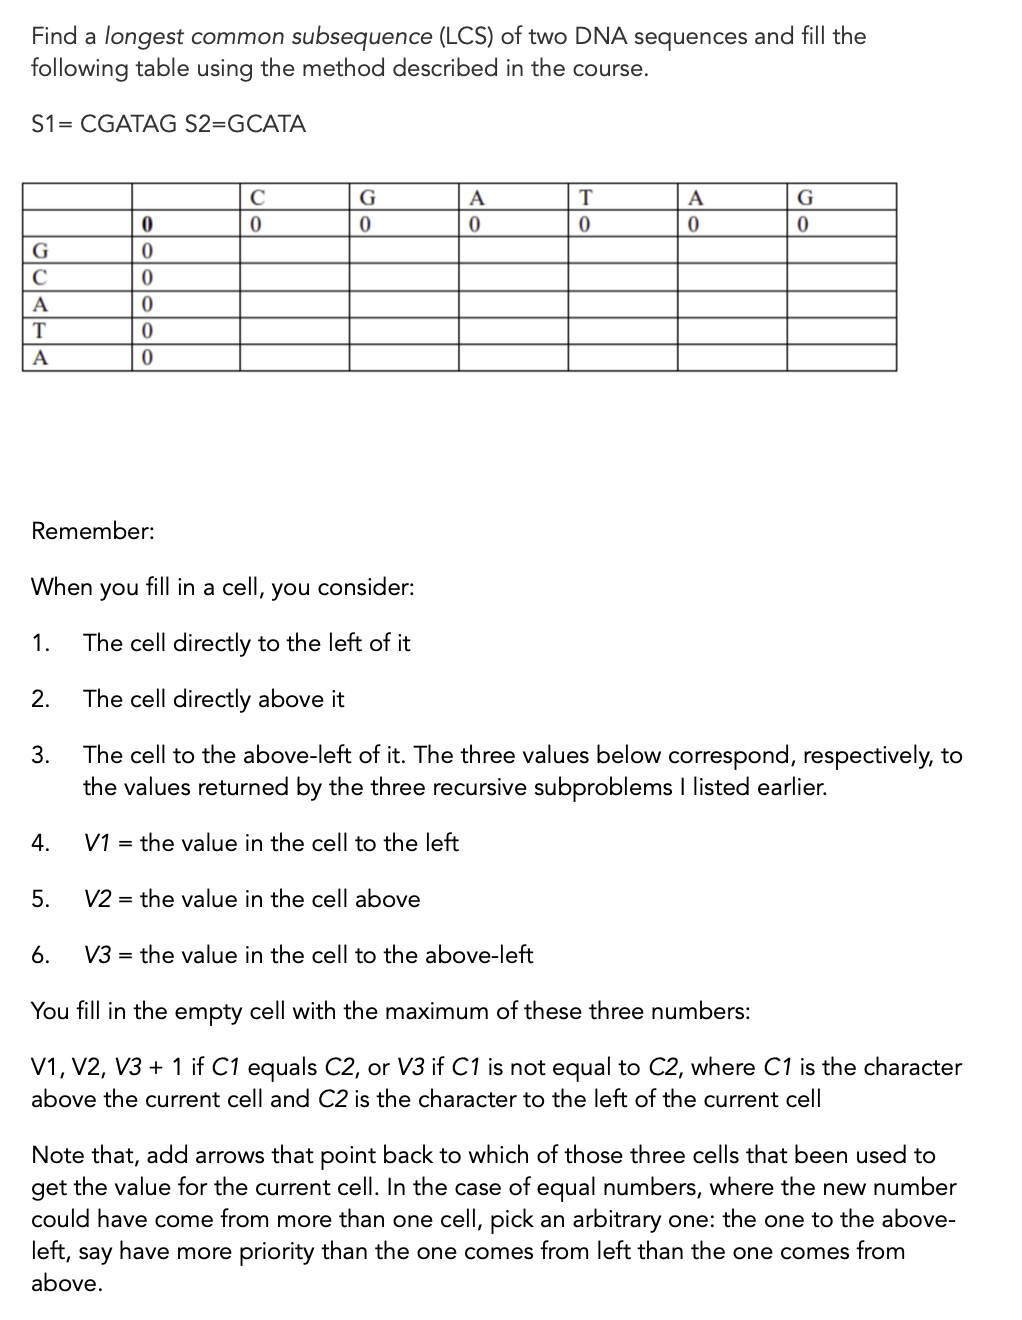 Find a longest common subsequence (LCS) of two DNA sequences and fill the
following table using the method described in the course.
S1= CGATAG S2=GCATA
G
A
T
A
G
C
A
A
Remember:
When
you
fill in a cell, you consider:
1.
The cell directly to the left of it
2.
The cell directly above it
The cell to the above-left of it. The three values below correspond, respectively, to
the values returned by the three recursive subproblems I listed earlier.
3.
4.
V1 = the value in the cell to the left
5.
V2 = the value in the cell above
6.
V3 = the value in the cell to the above-left
You fill in the empty cell with the maximum of these three numbers:
V1, V2, V3 + 1 if C1 equals C2, or V3 if C1 is not equal to C2, where C1 is the character
above the current cell and C2 is the character to the left of the current cell
Note that, add arrows that point back to which of those three cells that been used to
get the value for the current cell. In the case of equal numbers, where the new number
could have come from more than one cell, pick an arbitrary one: the one to the above-
left, say have more priority than the one comes from left than the one comes from
above.
